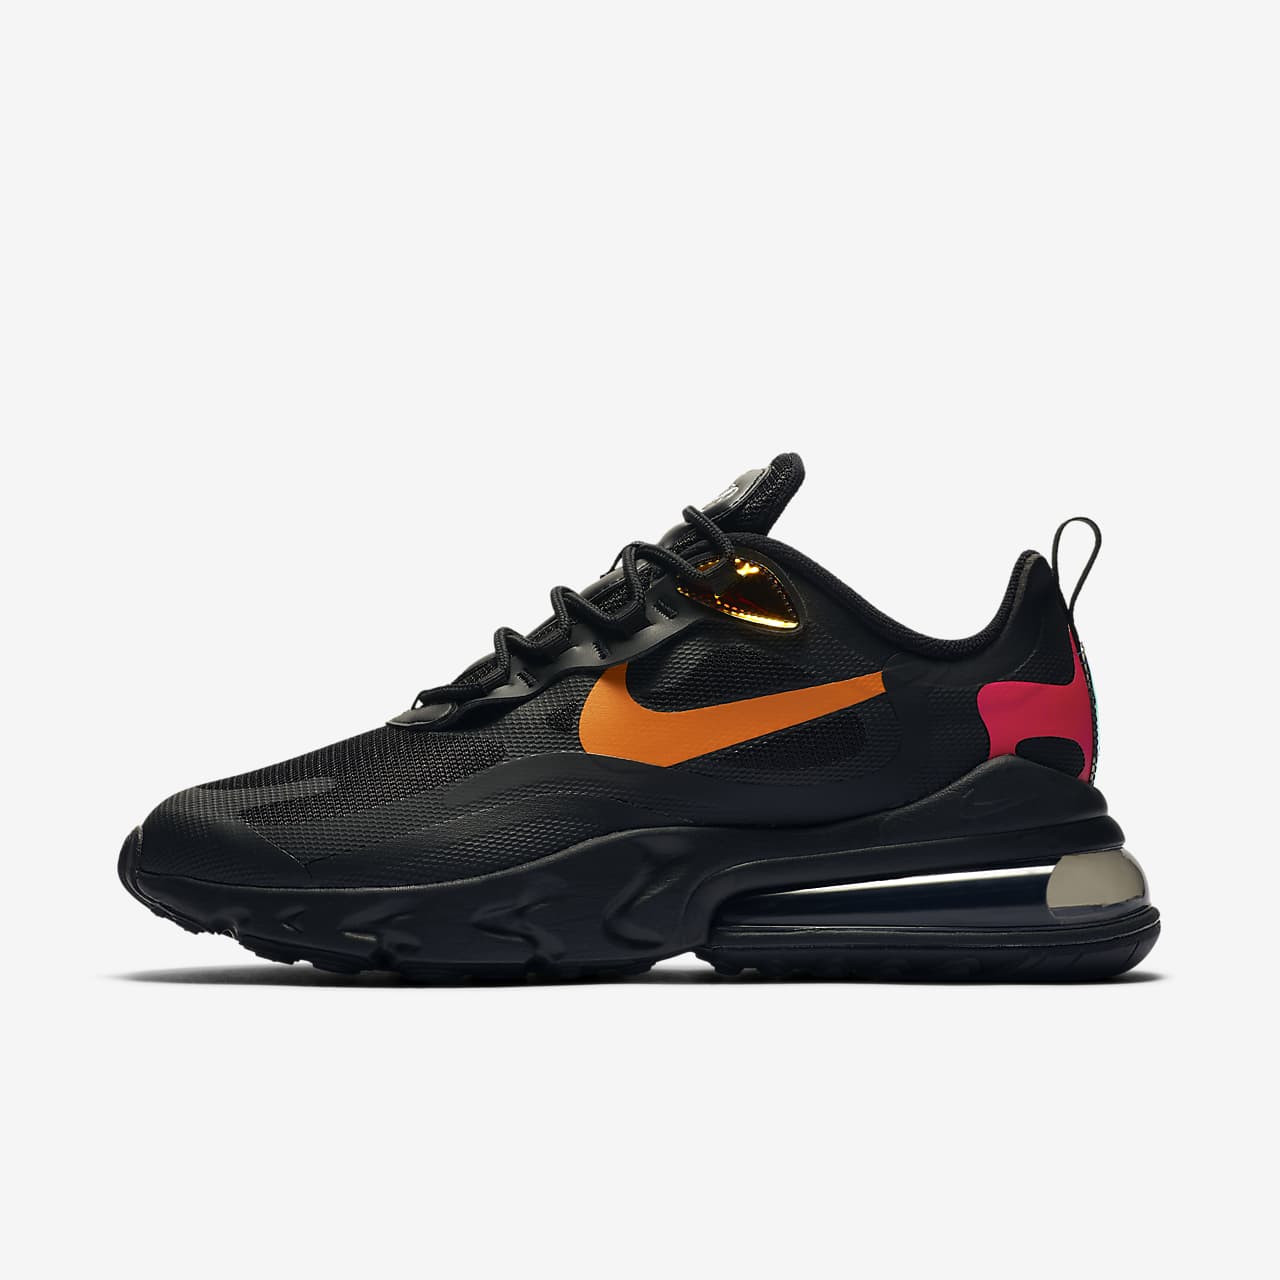 Nike Airmax React 270 Outlet, SAVE 30 